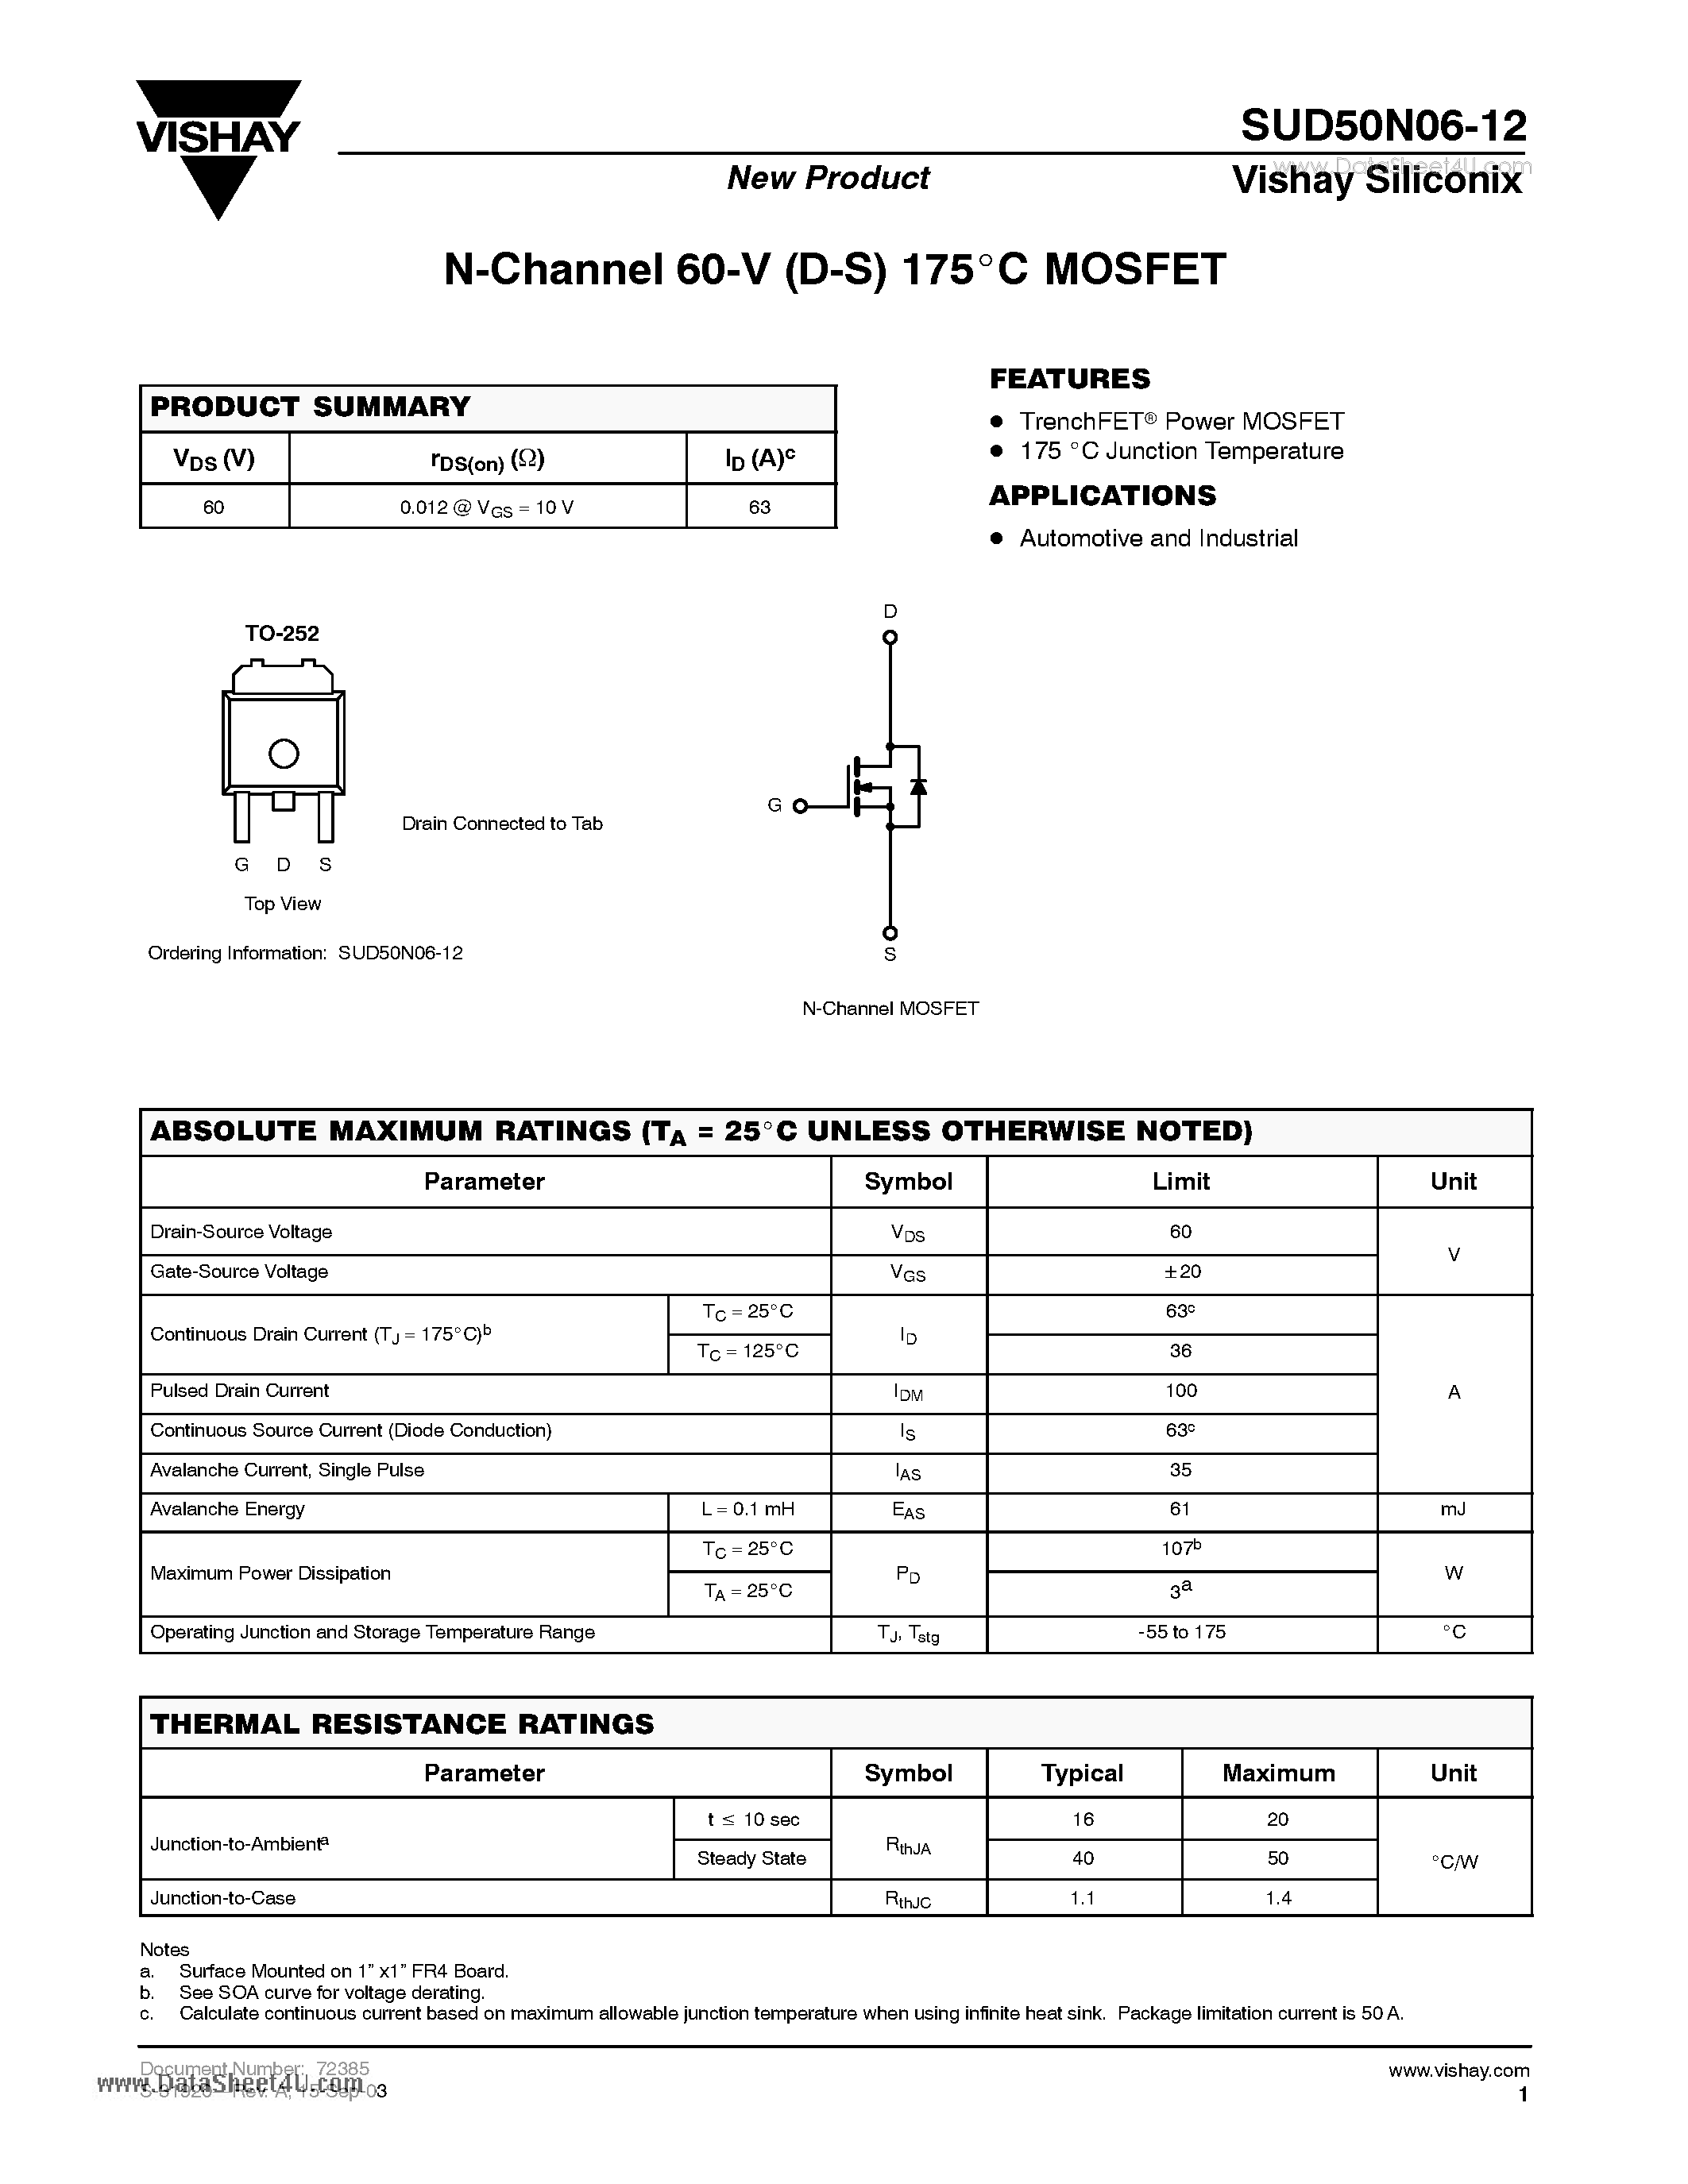 Datasheet SUD50N06-12 - N-Channel 60-V (D-S) 175 C MOSFET page 1